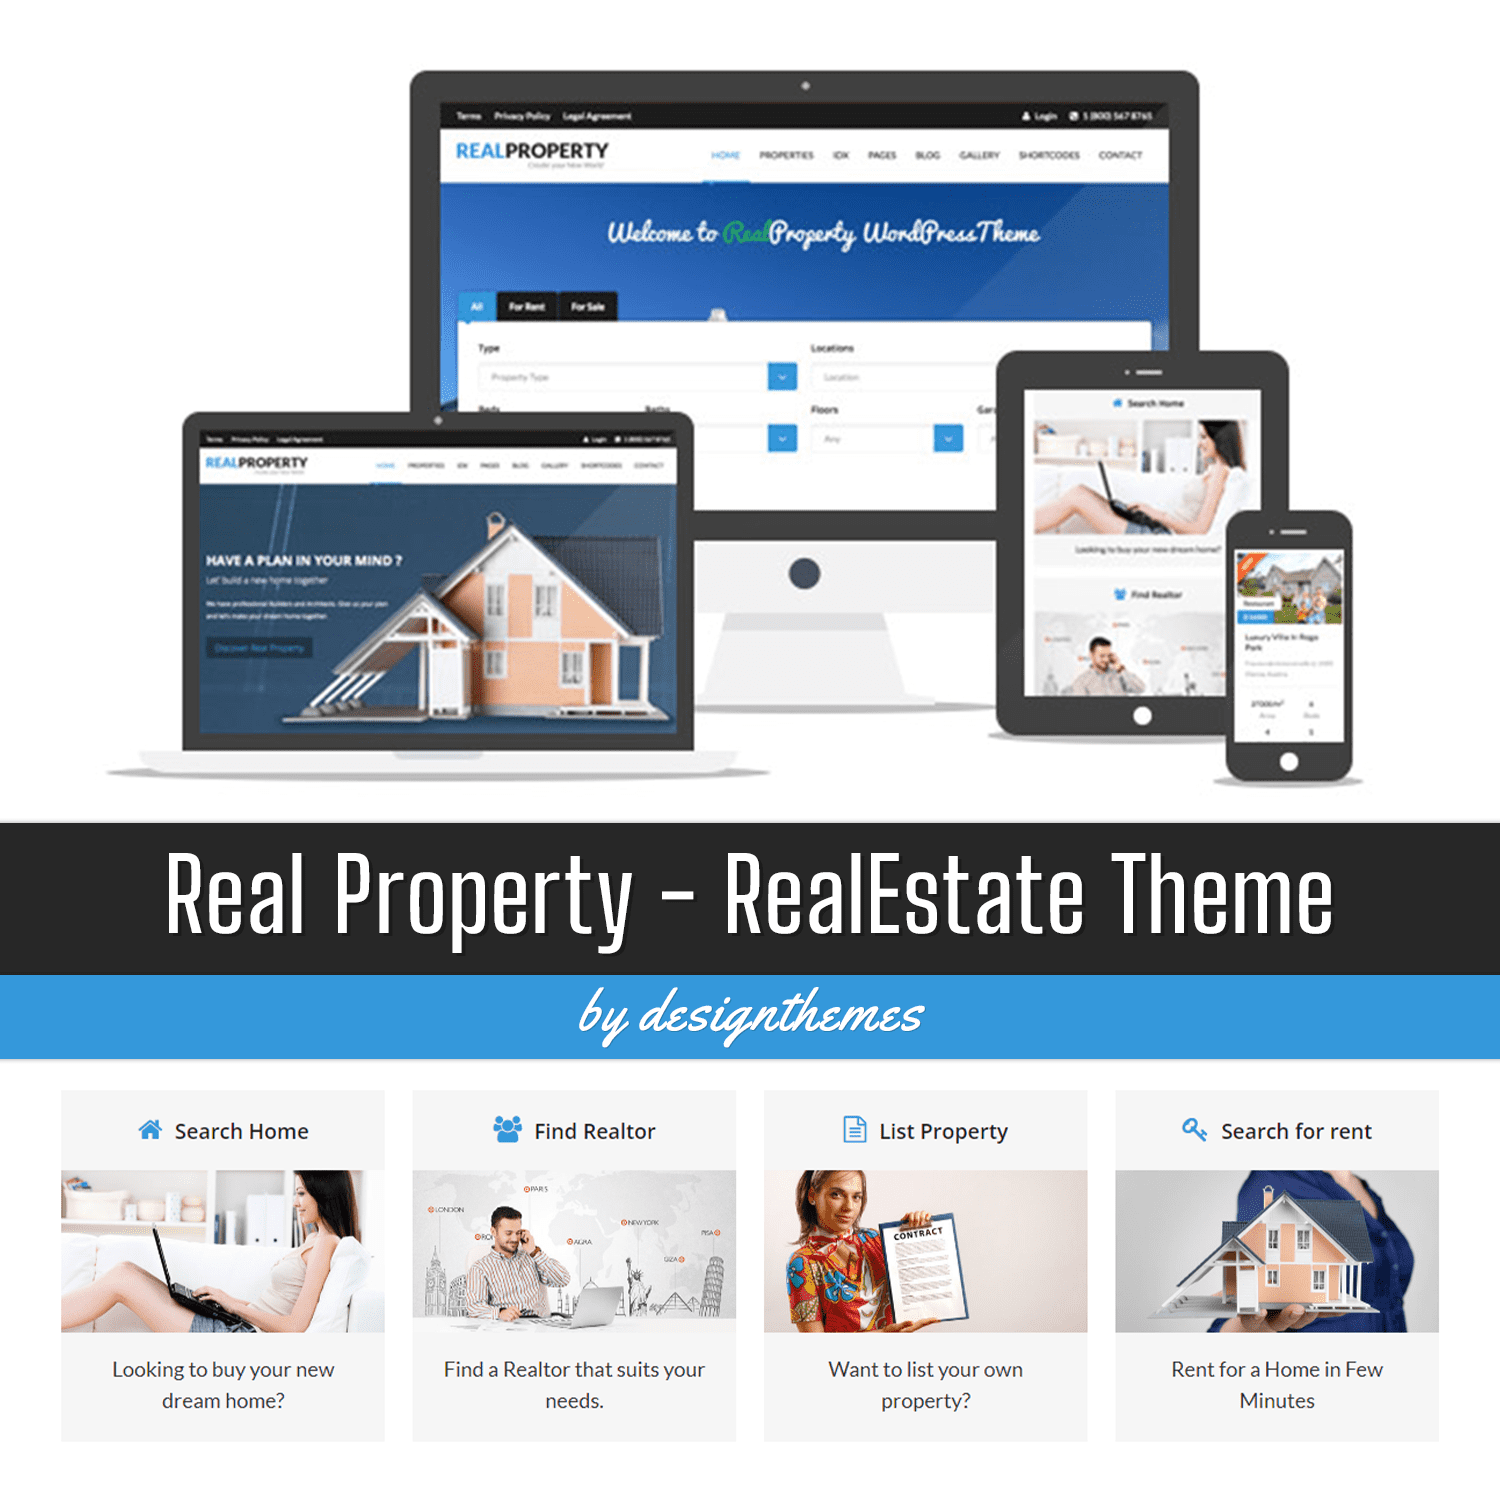 Real Property - RealEstate Theme cover.